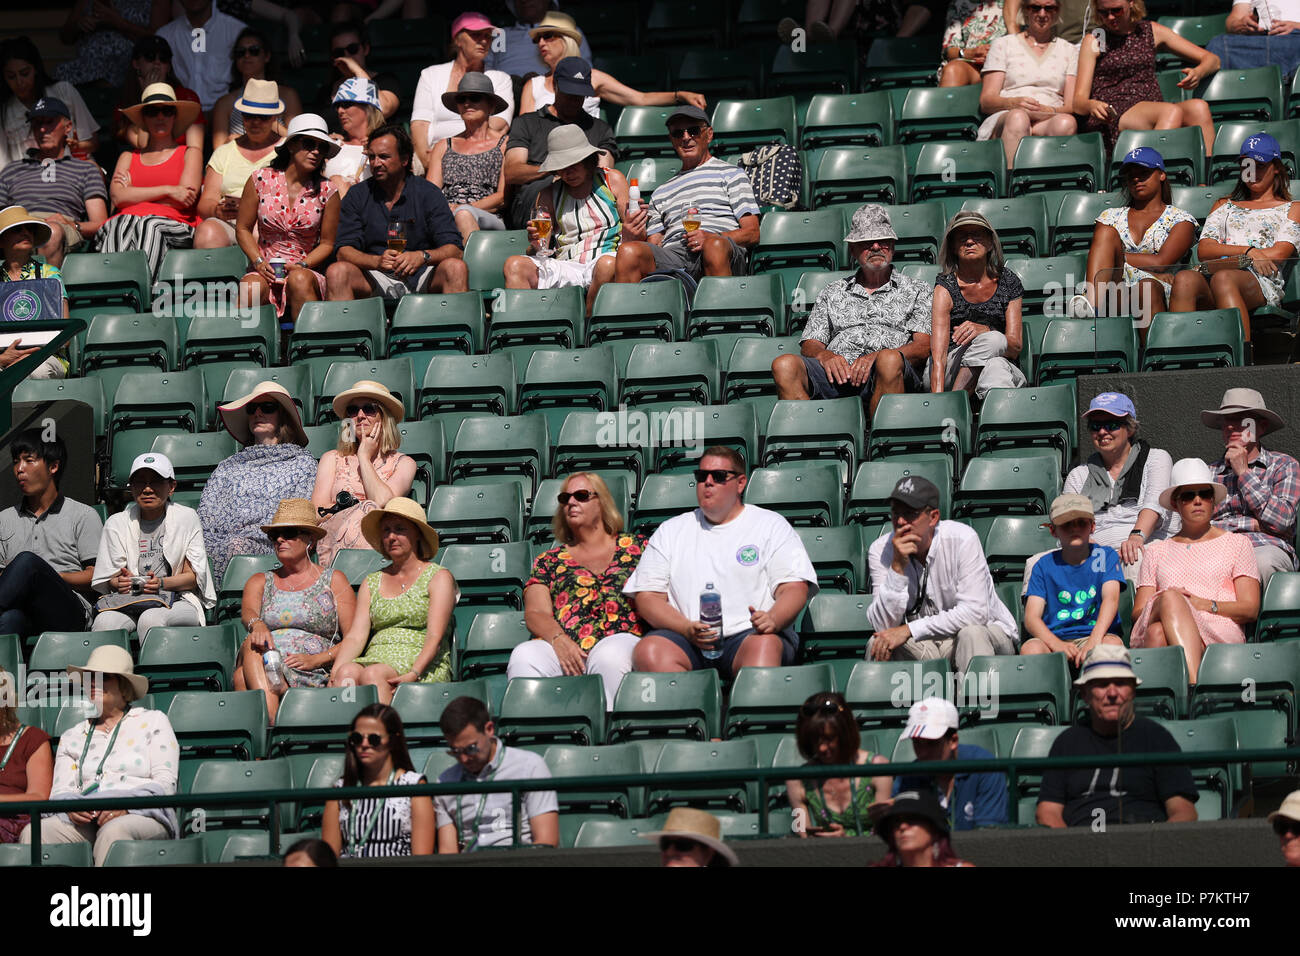 London, UK. 7th July 2018. The Wimbledon Tennis Championships, Day 6; May empty seats on centre court due to England playing their World Cup football match at the same time in Russia Credit: Action Plus Sports Images/Alamy Live News Credit: Action Plus Sports Images/Alamy Live News Credit: Action Plus Sports Images/Alamy Live News Stock Photo